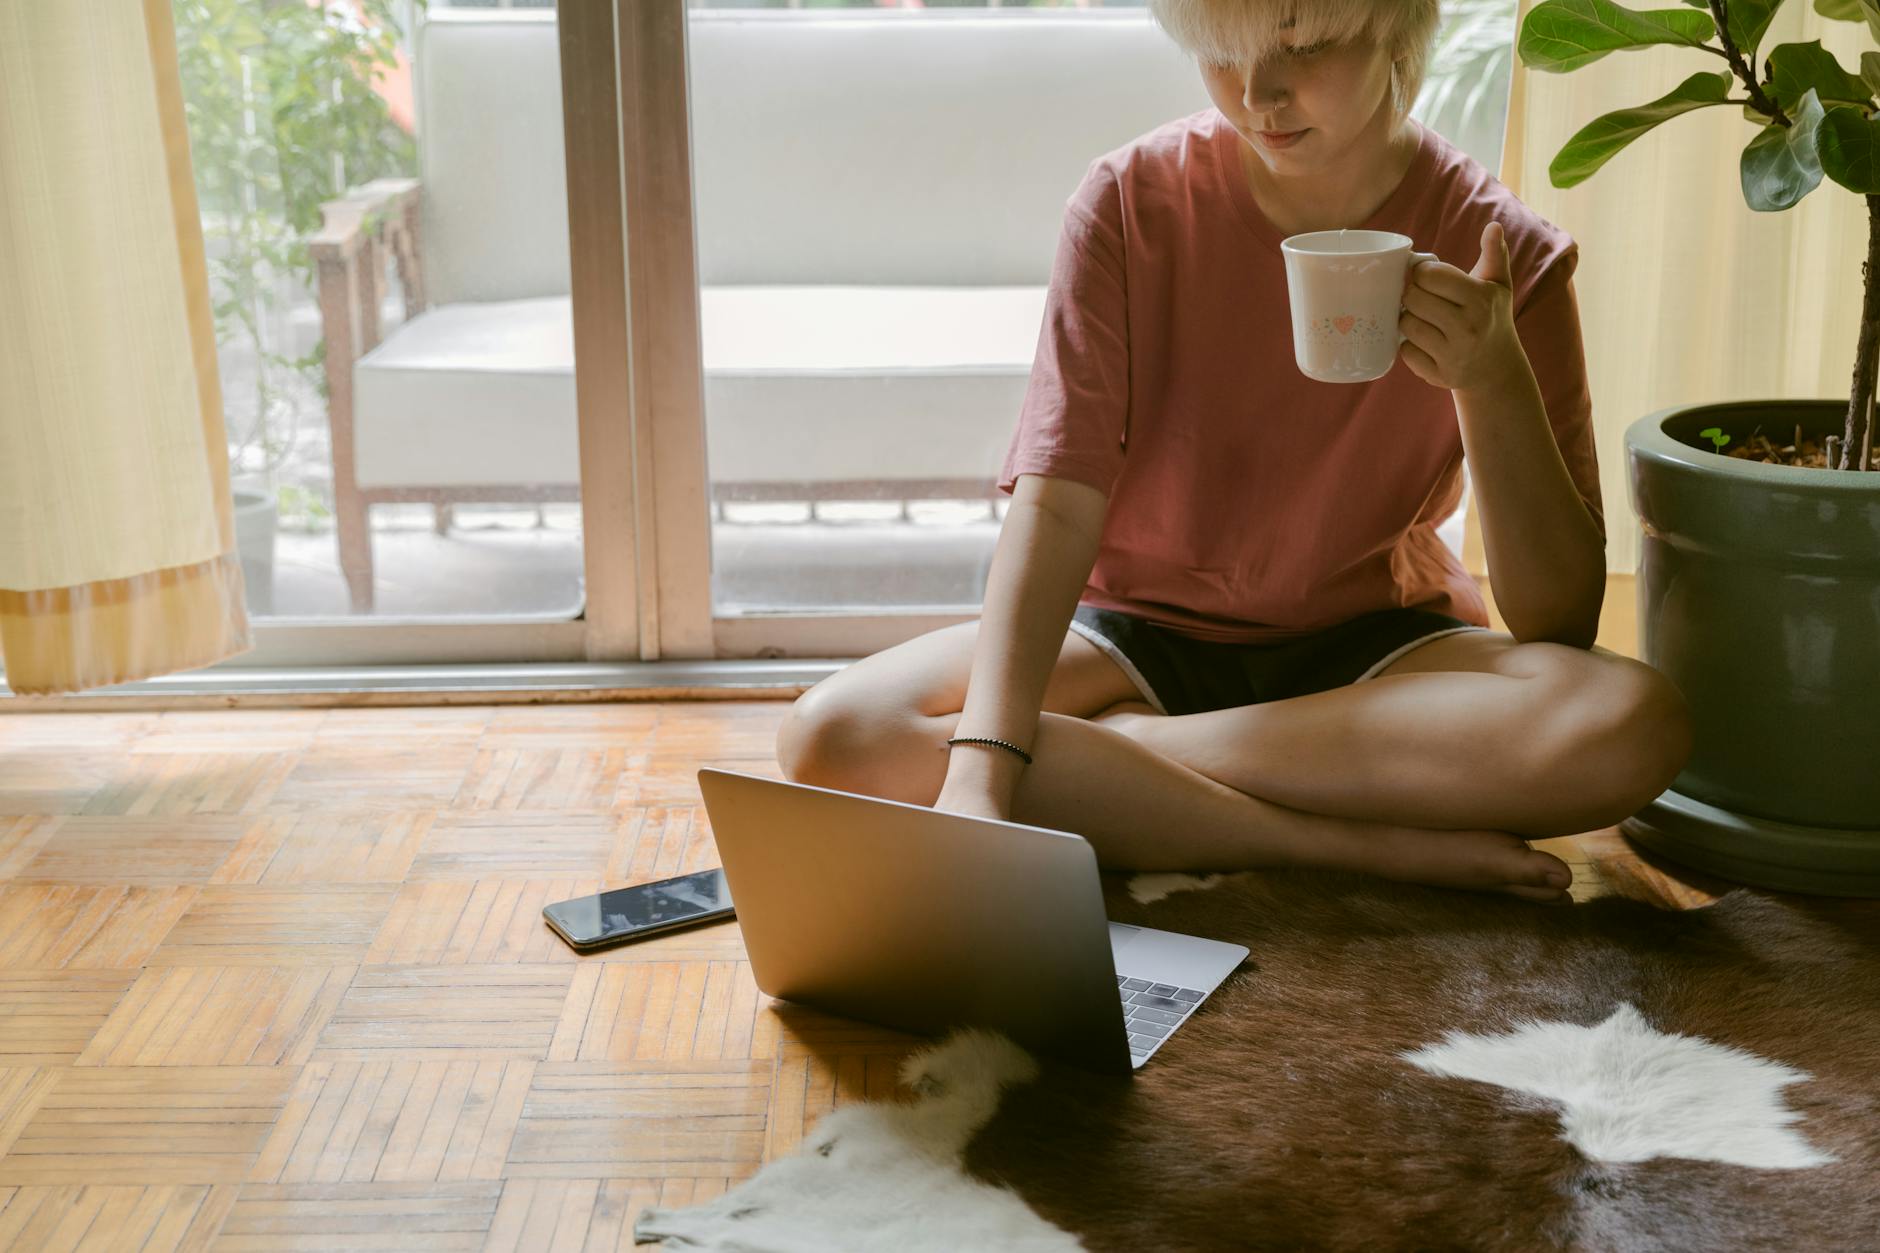 Woman sitting on floor drinking coffee and surfing on laptop 